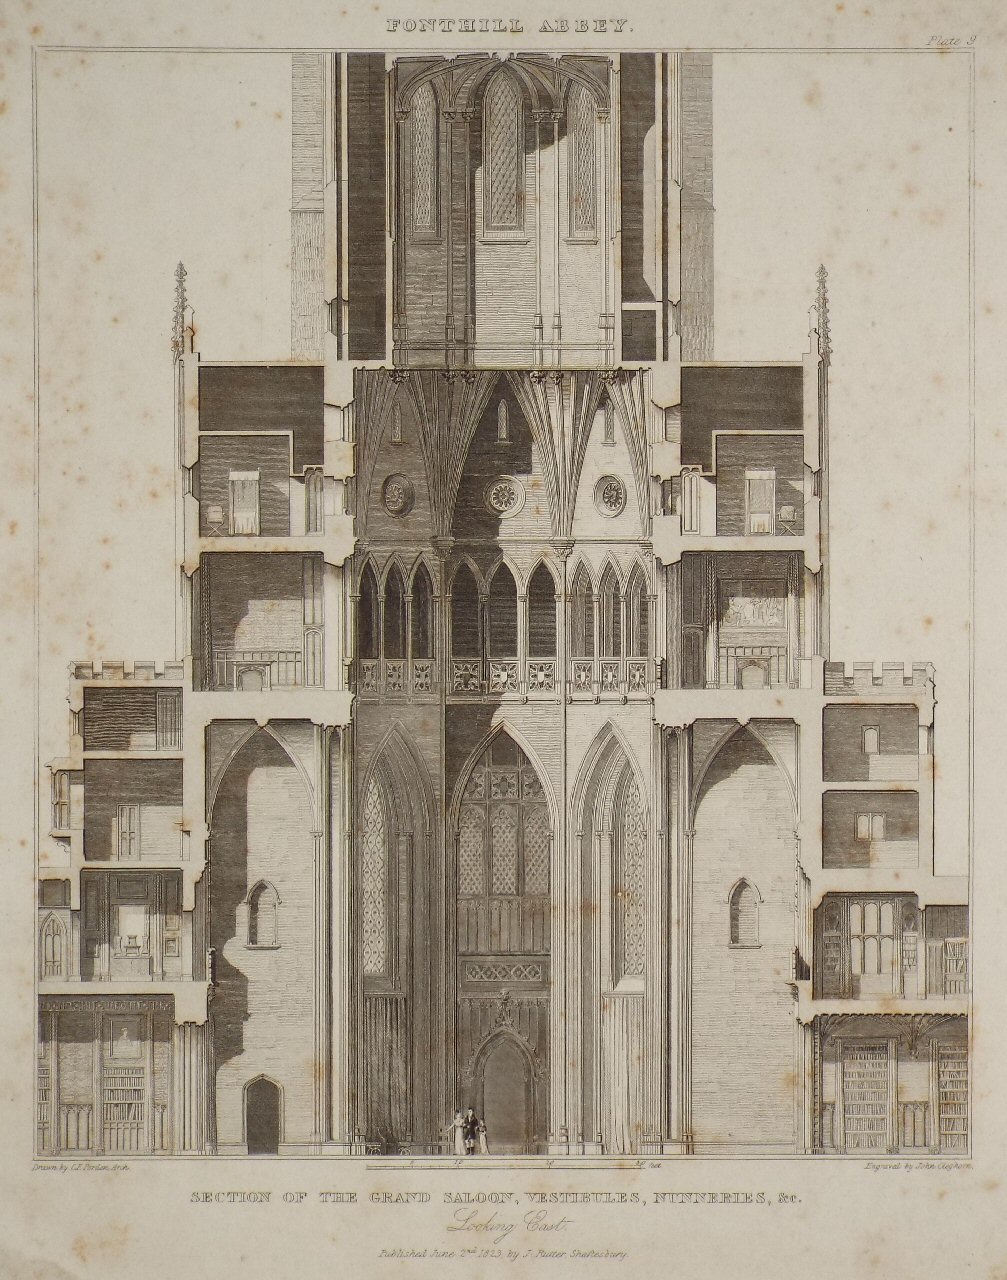 Print - Fonthill Abbey. Section of the Grand Saloon,  Vestibules,  Nunneries,  &c - Cleghorn